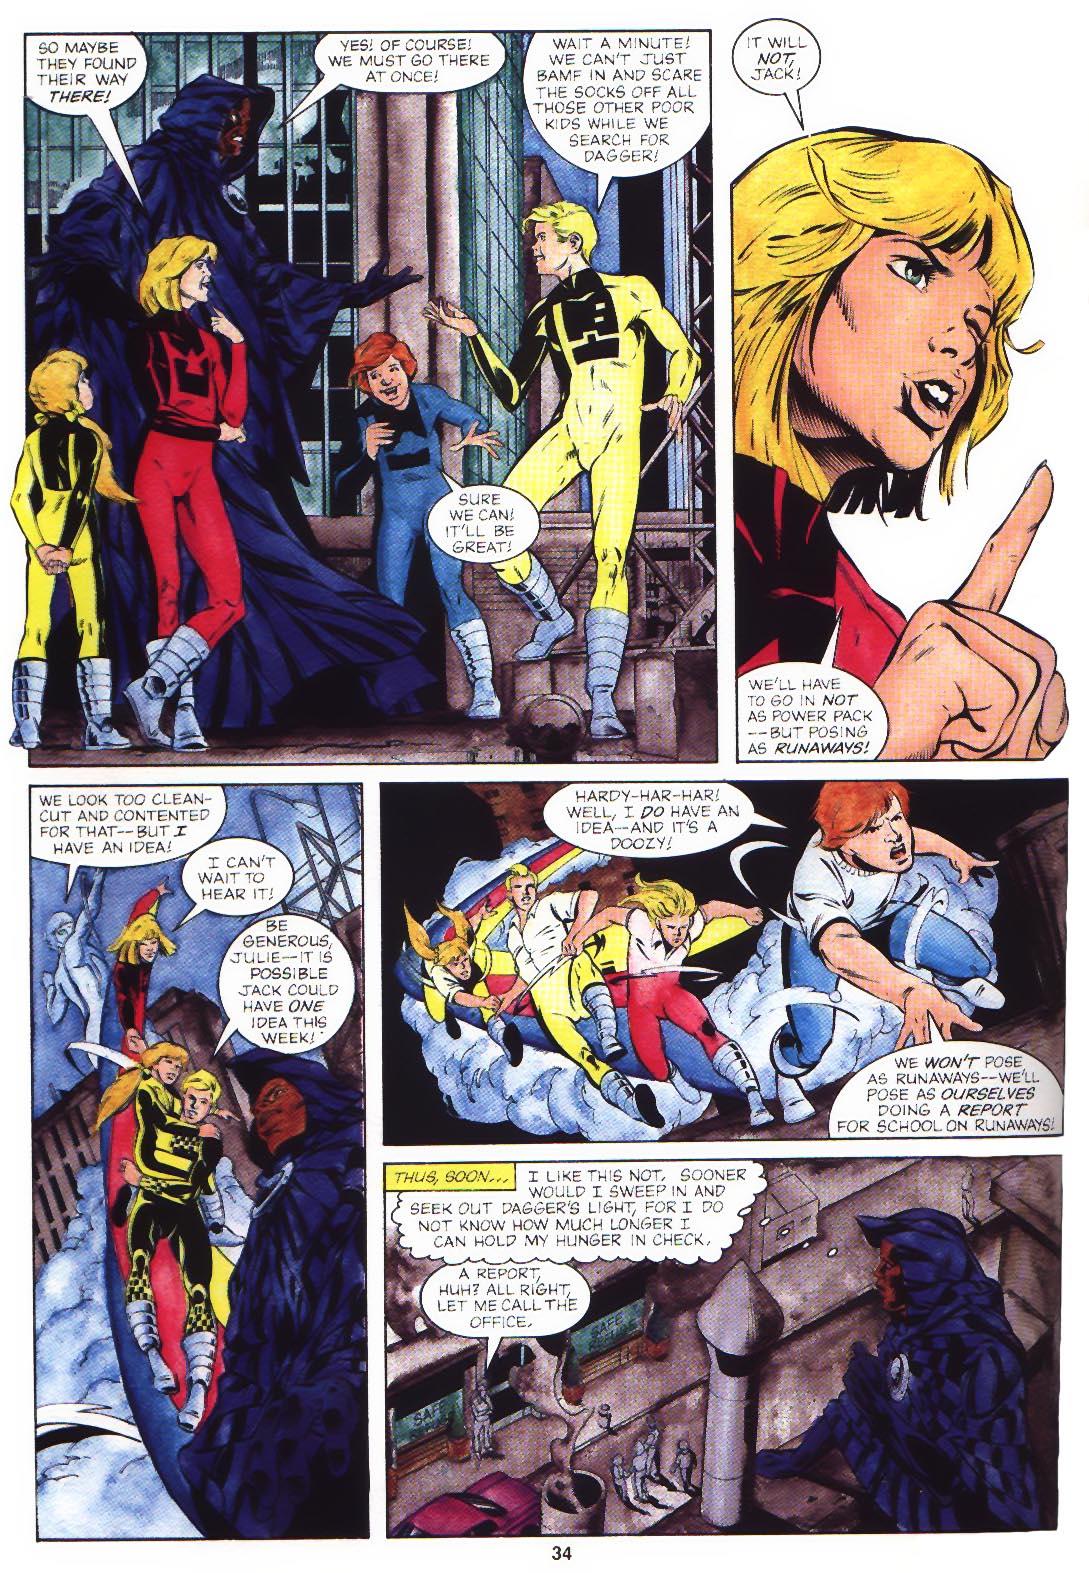 Power Pack and Cloak & Dagger Shelter From the Storm review